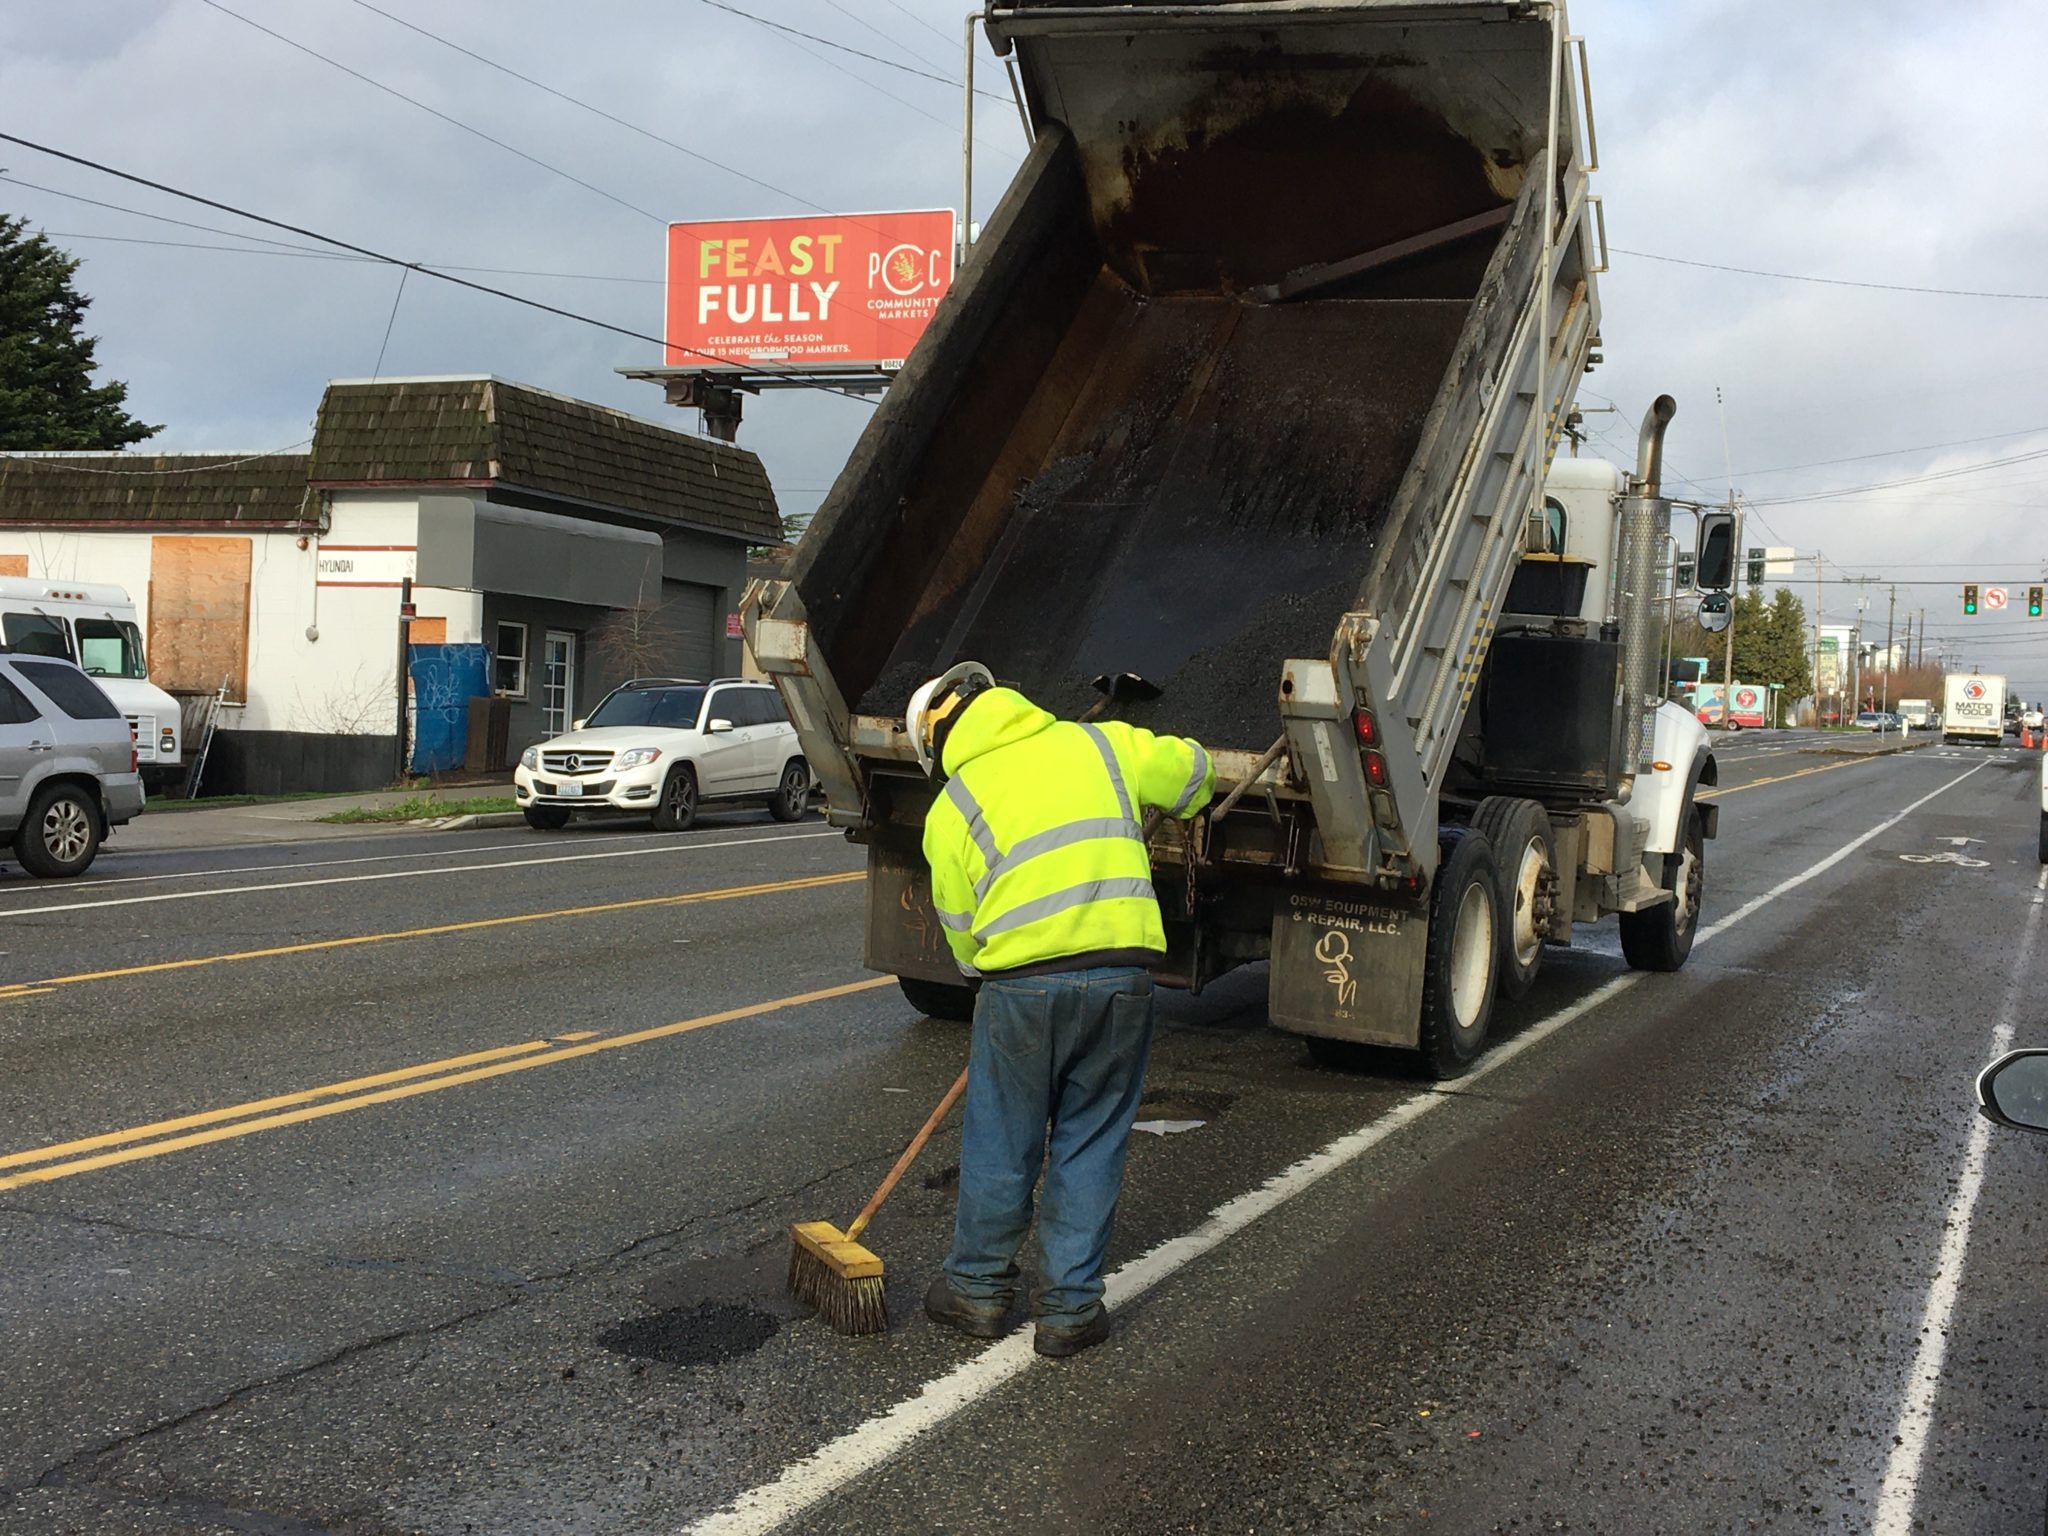 SDOT Crews filling several potholes on Greenwood Ave N near N 100th St on January 13, 2022.